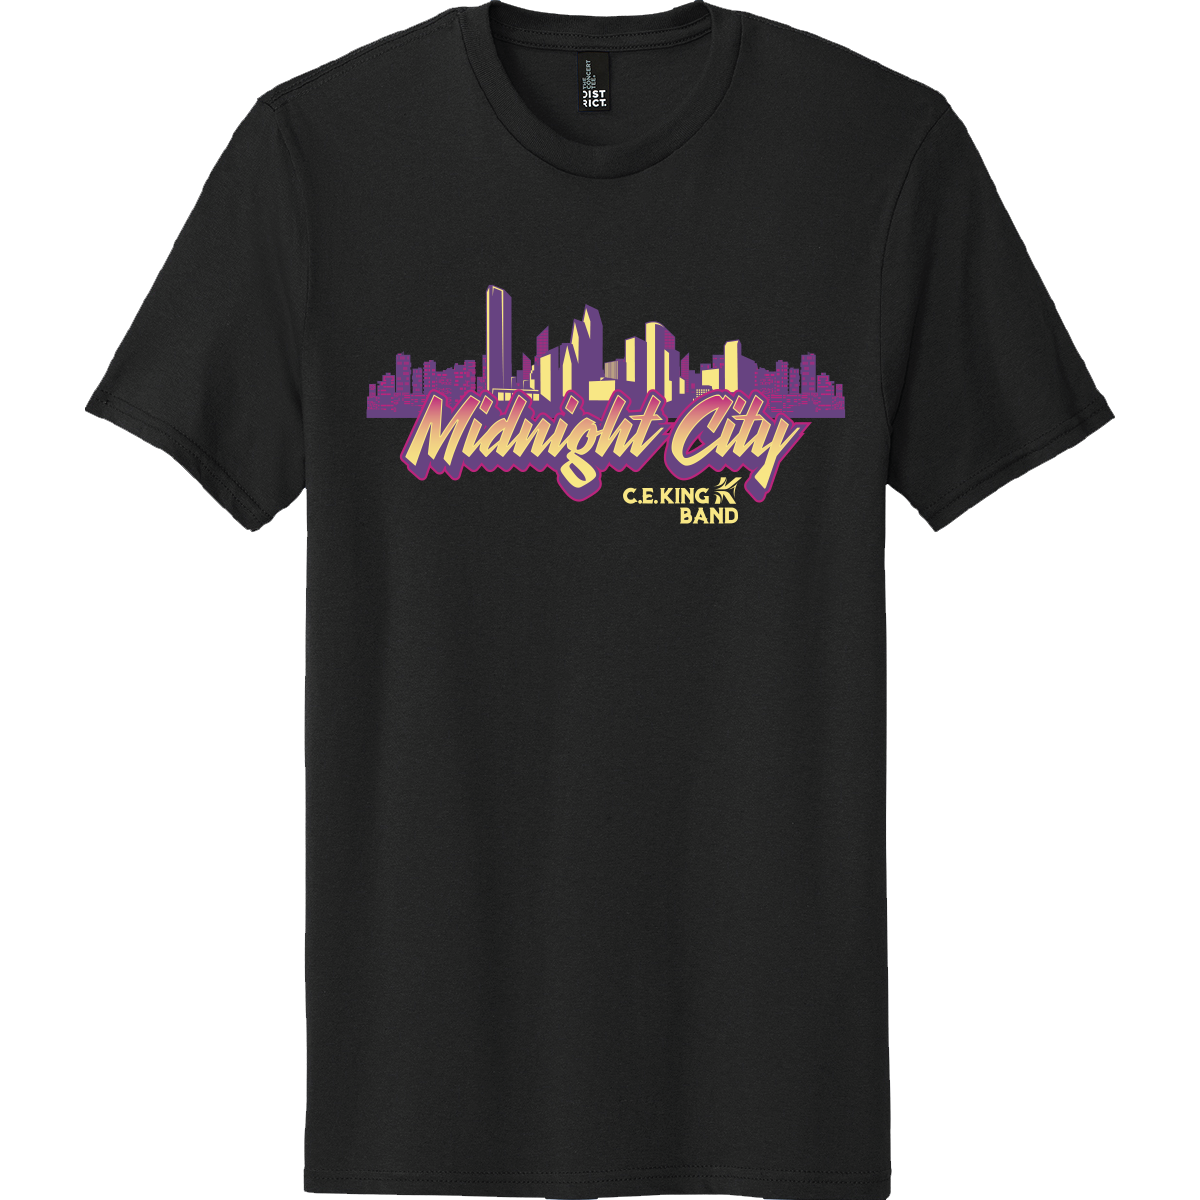 Show Shirt - "Midnight City" - (1) REQUIRED